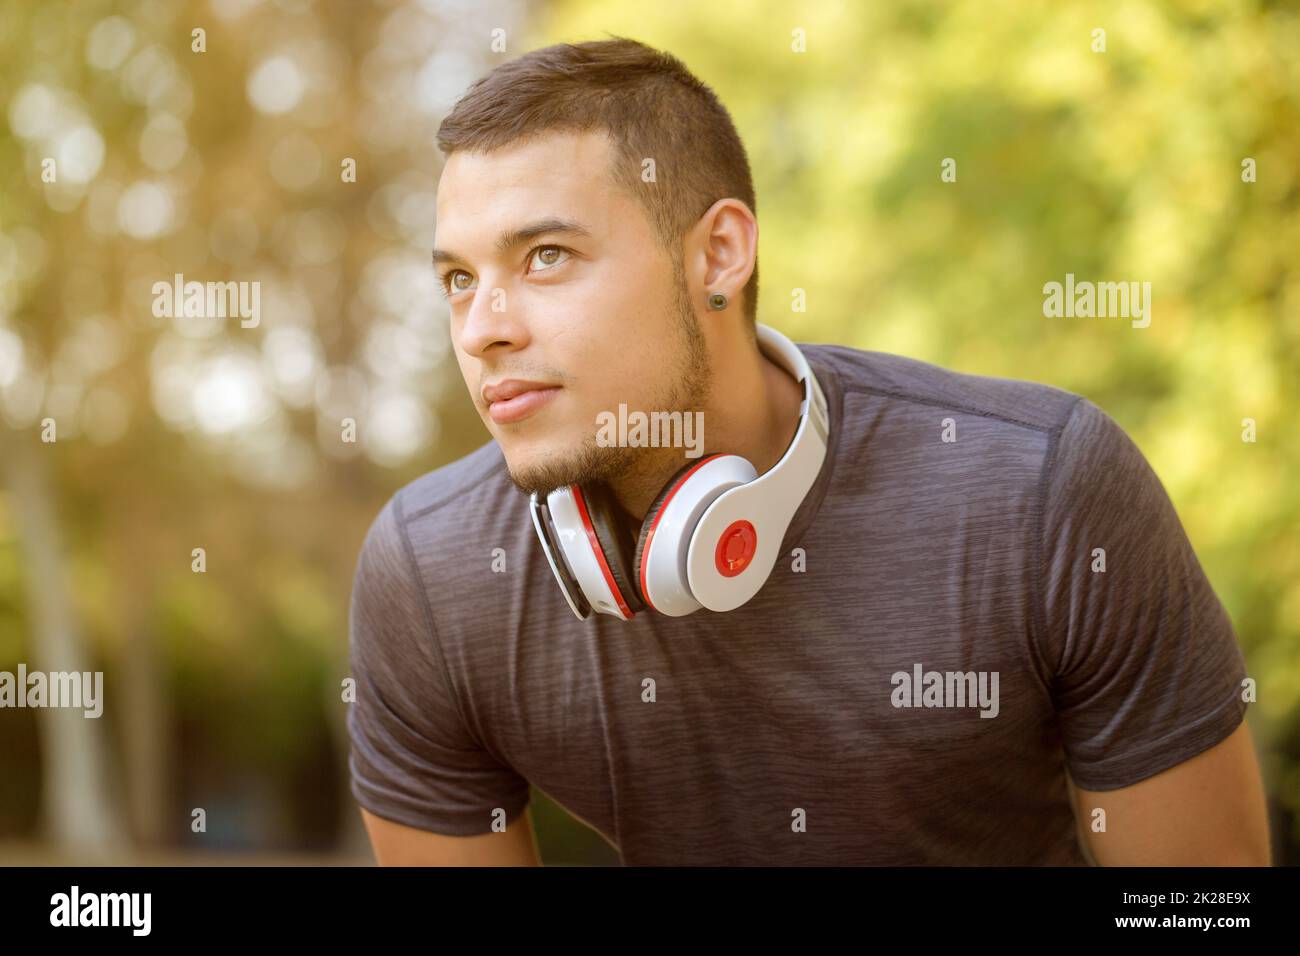 Young latin man runner looking up thinking copyspace copy space sports training fitness workout Stock Photo